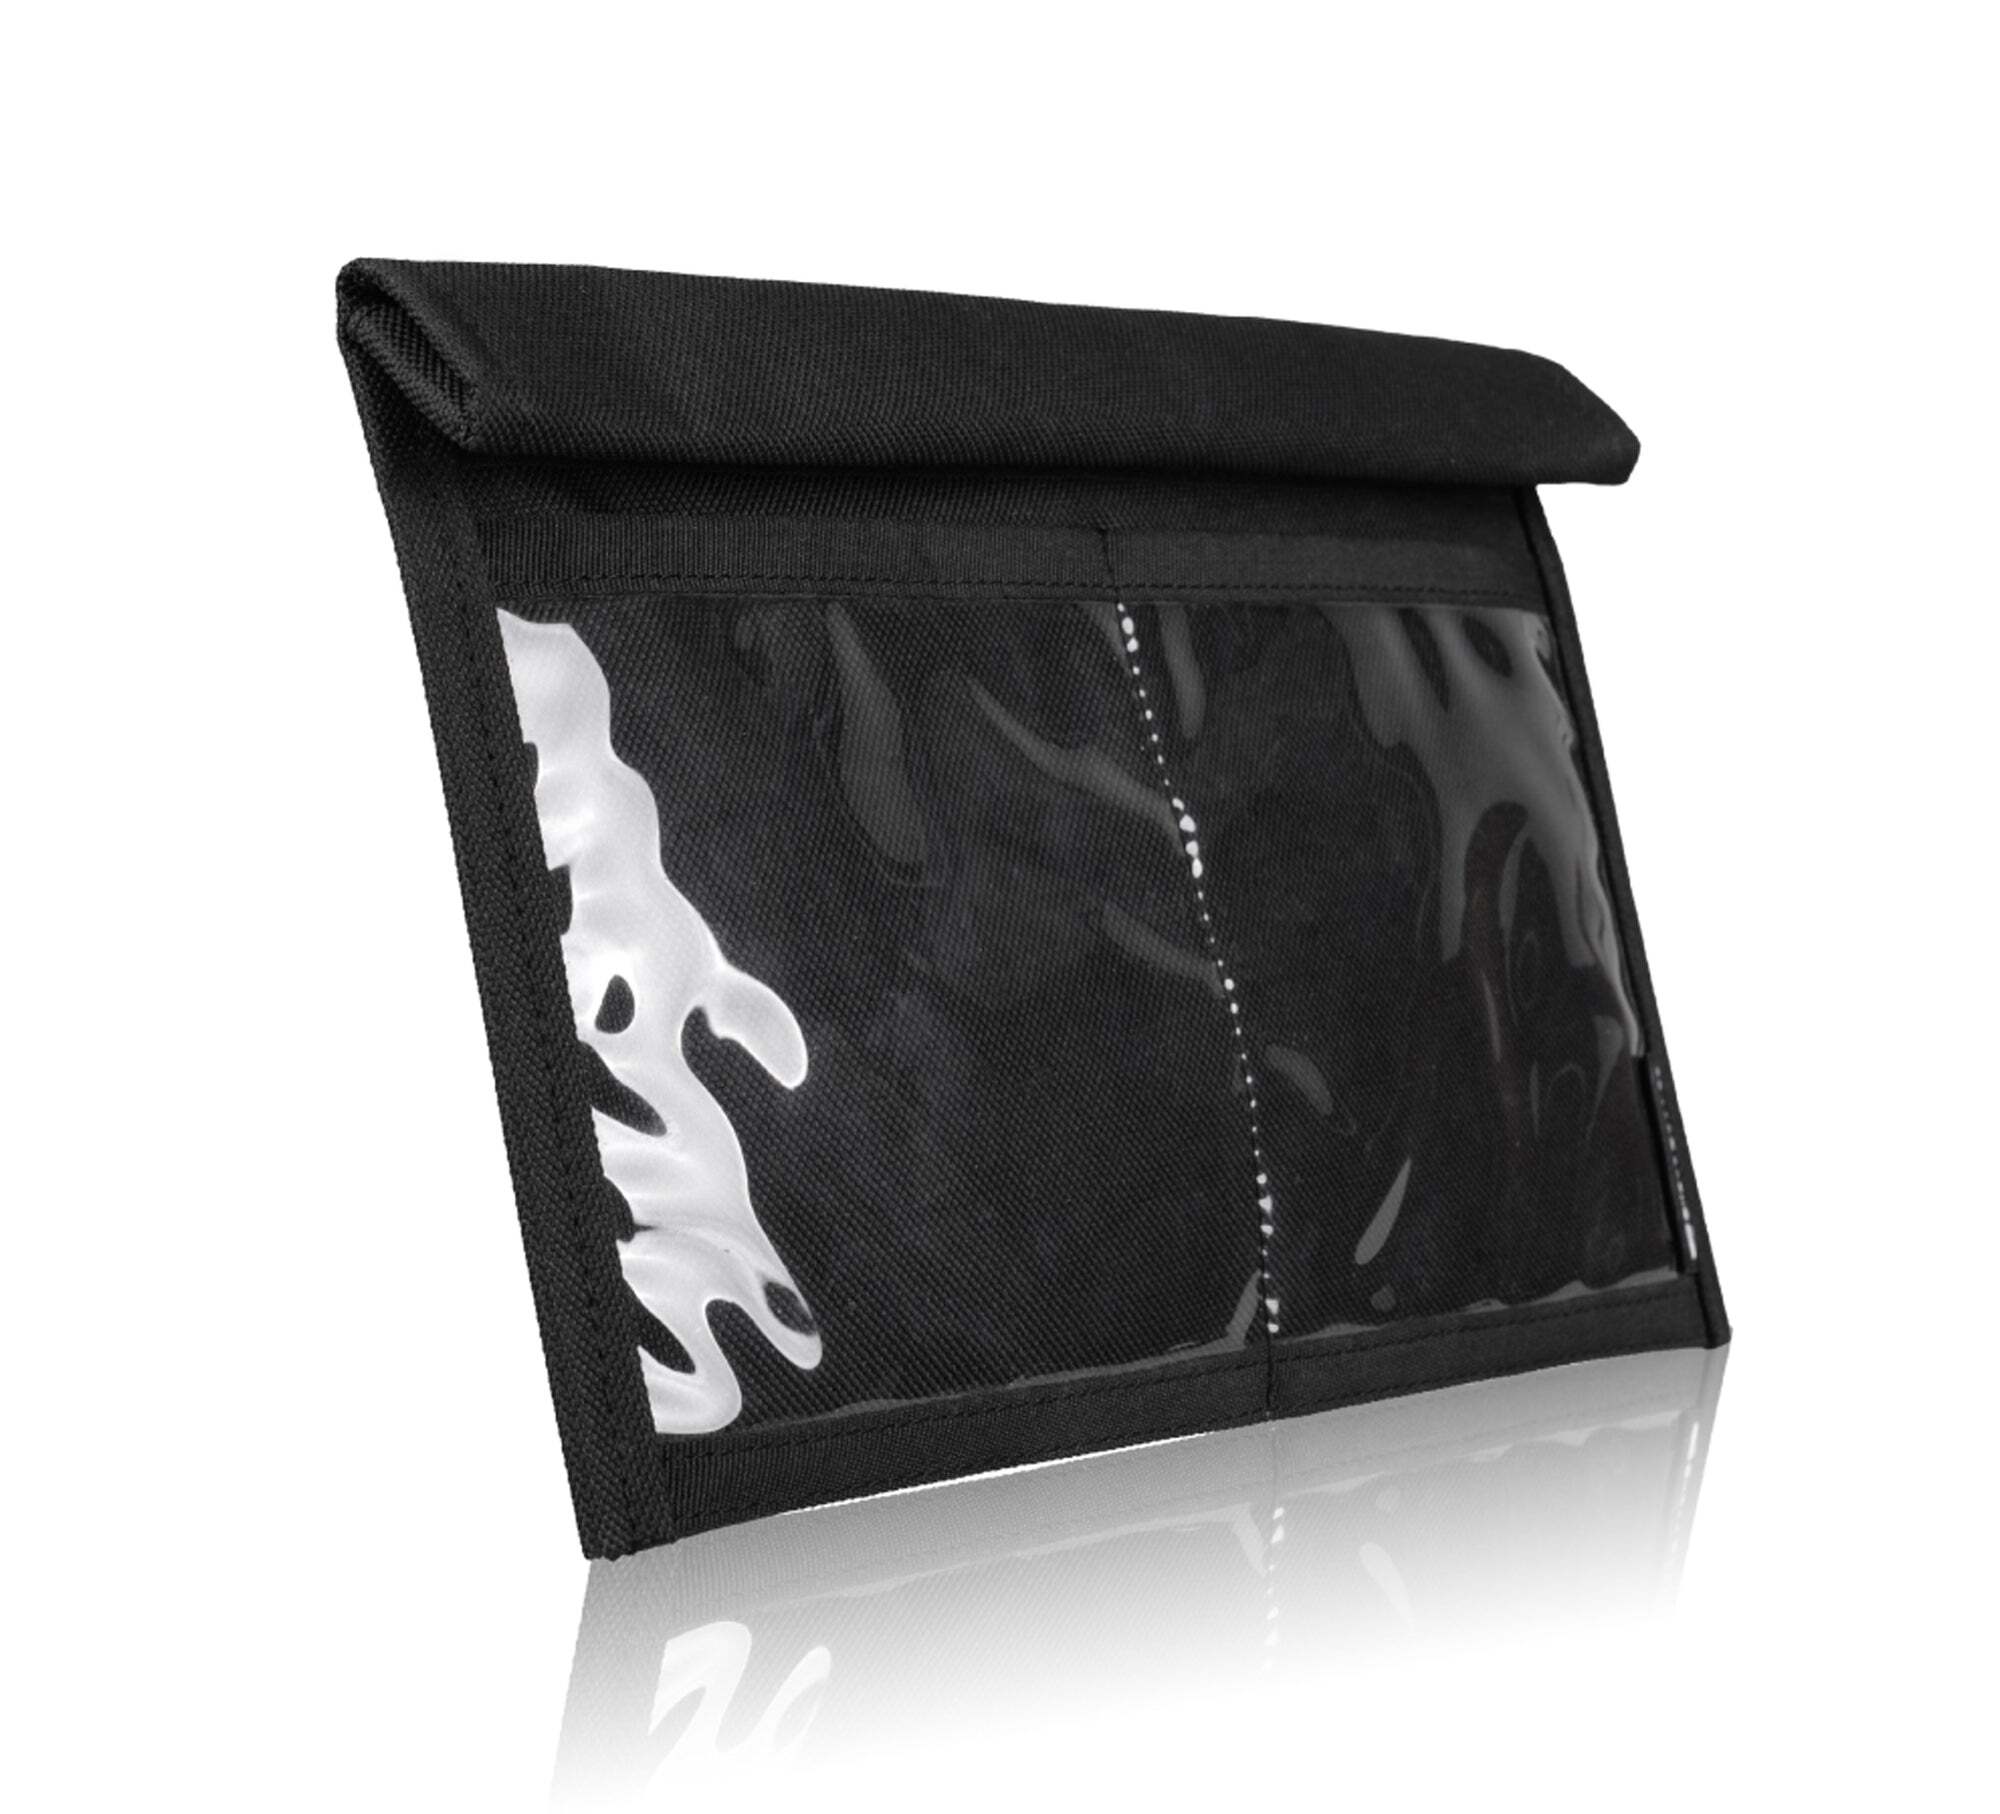 Large Utility Faraday Bag for Tablets & Multiple Devices - OzSpy Spy Shop